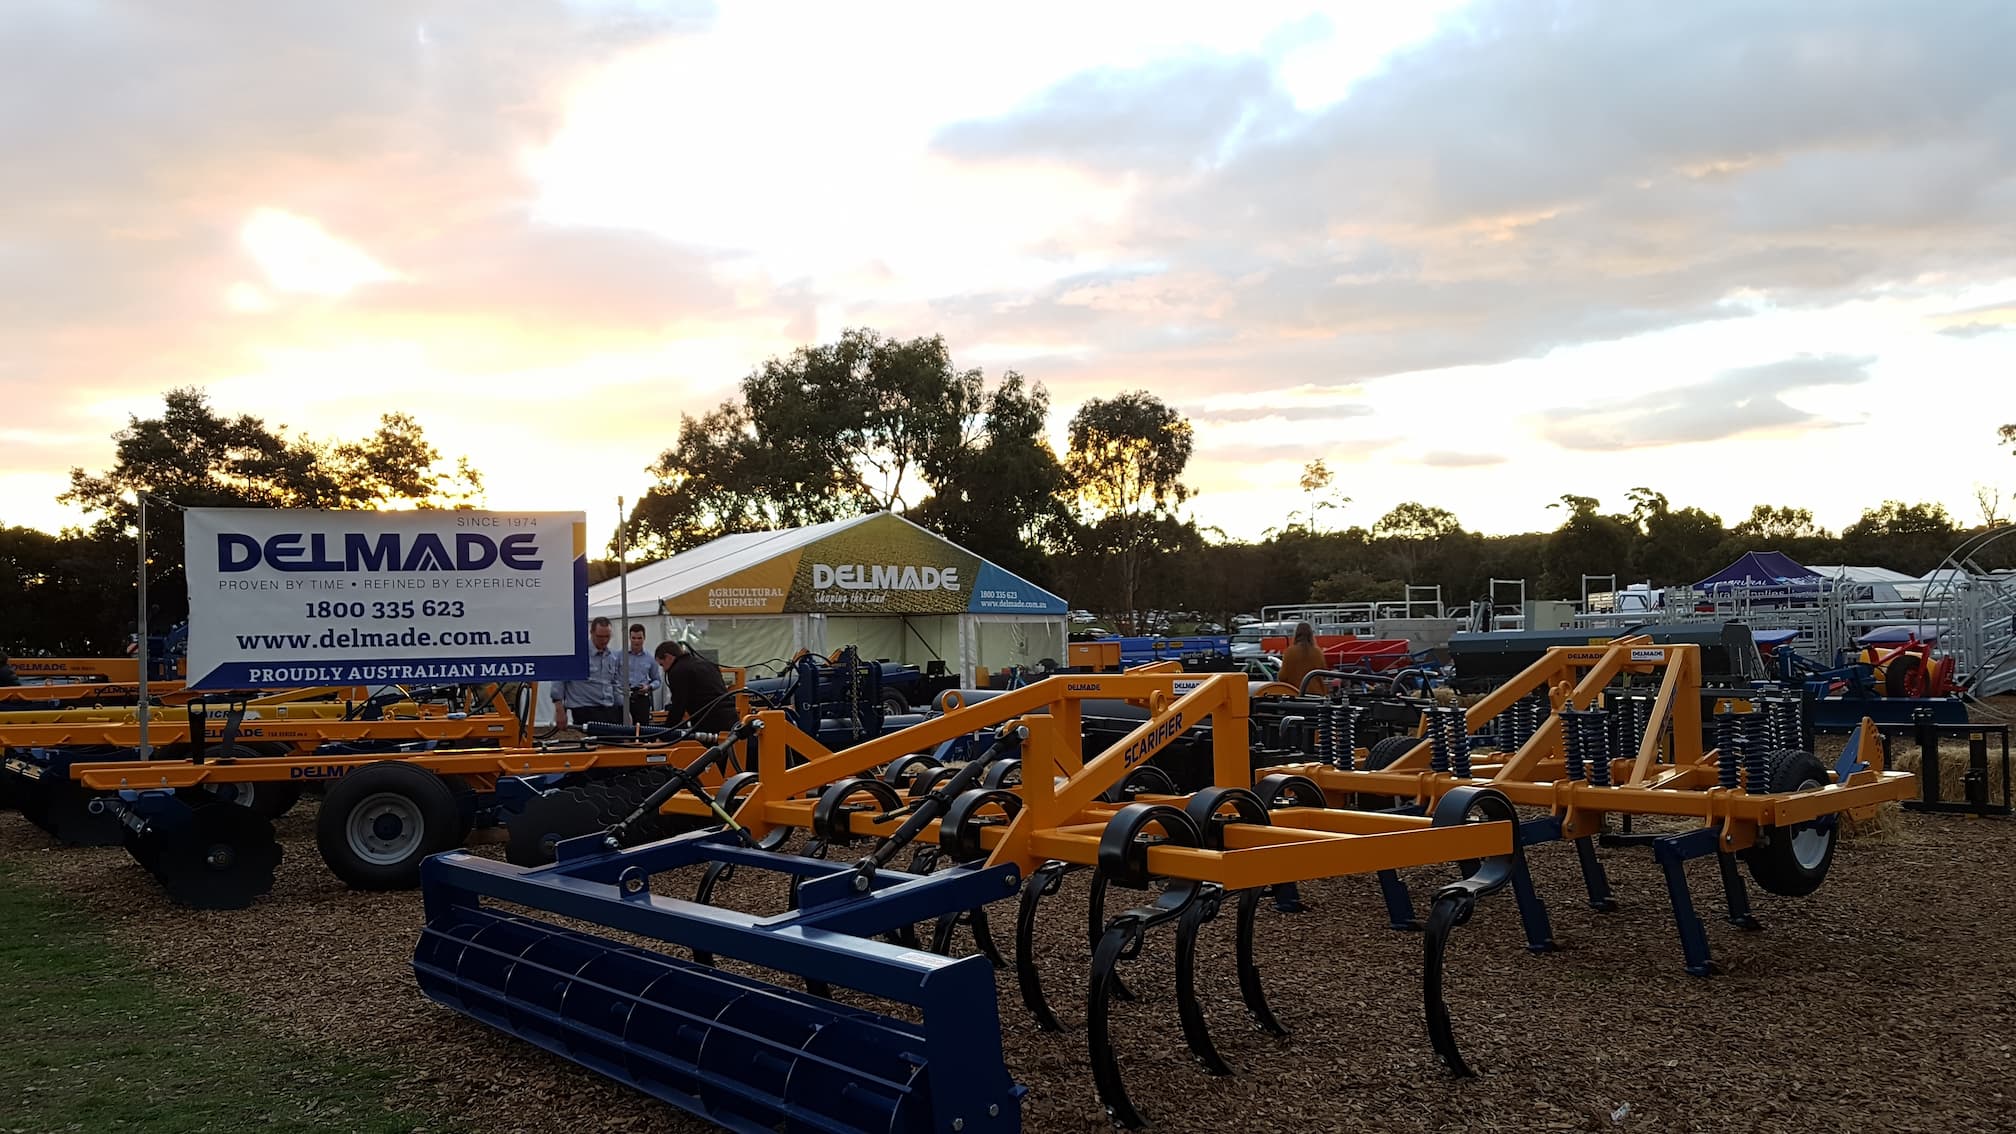 Delmade at Agfest 2019. Display showing portion of agricultural equipment on display, and tent